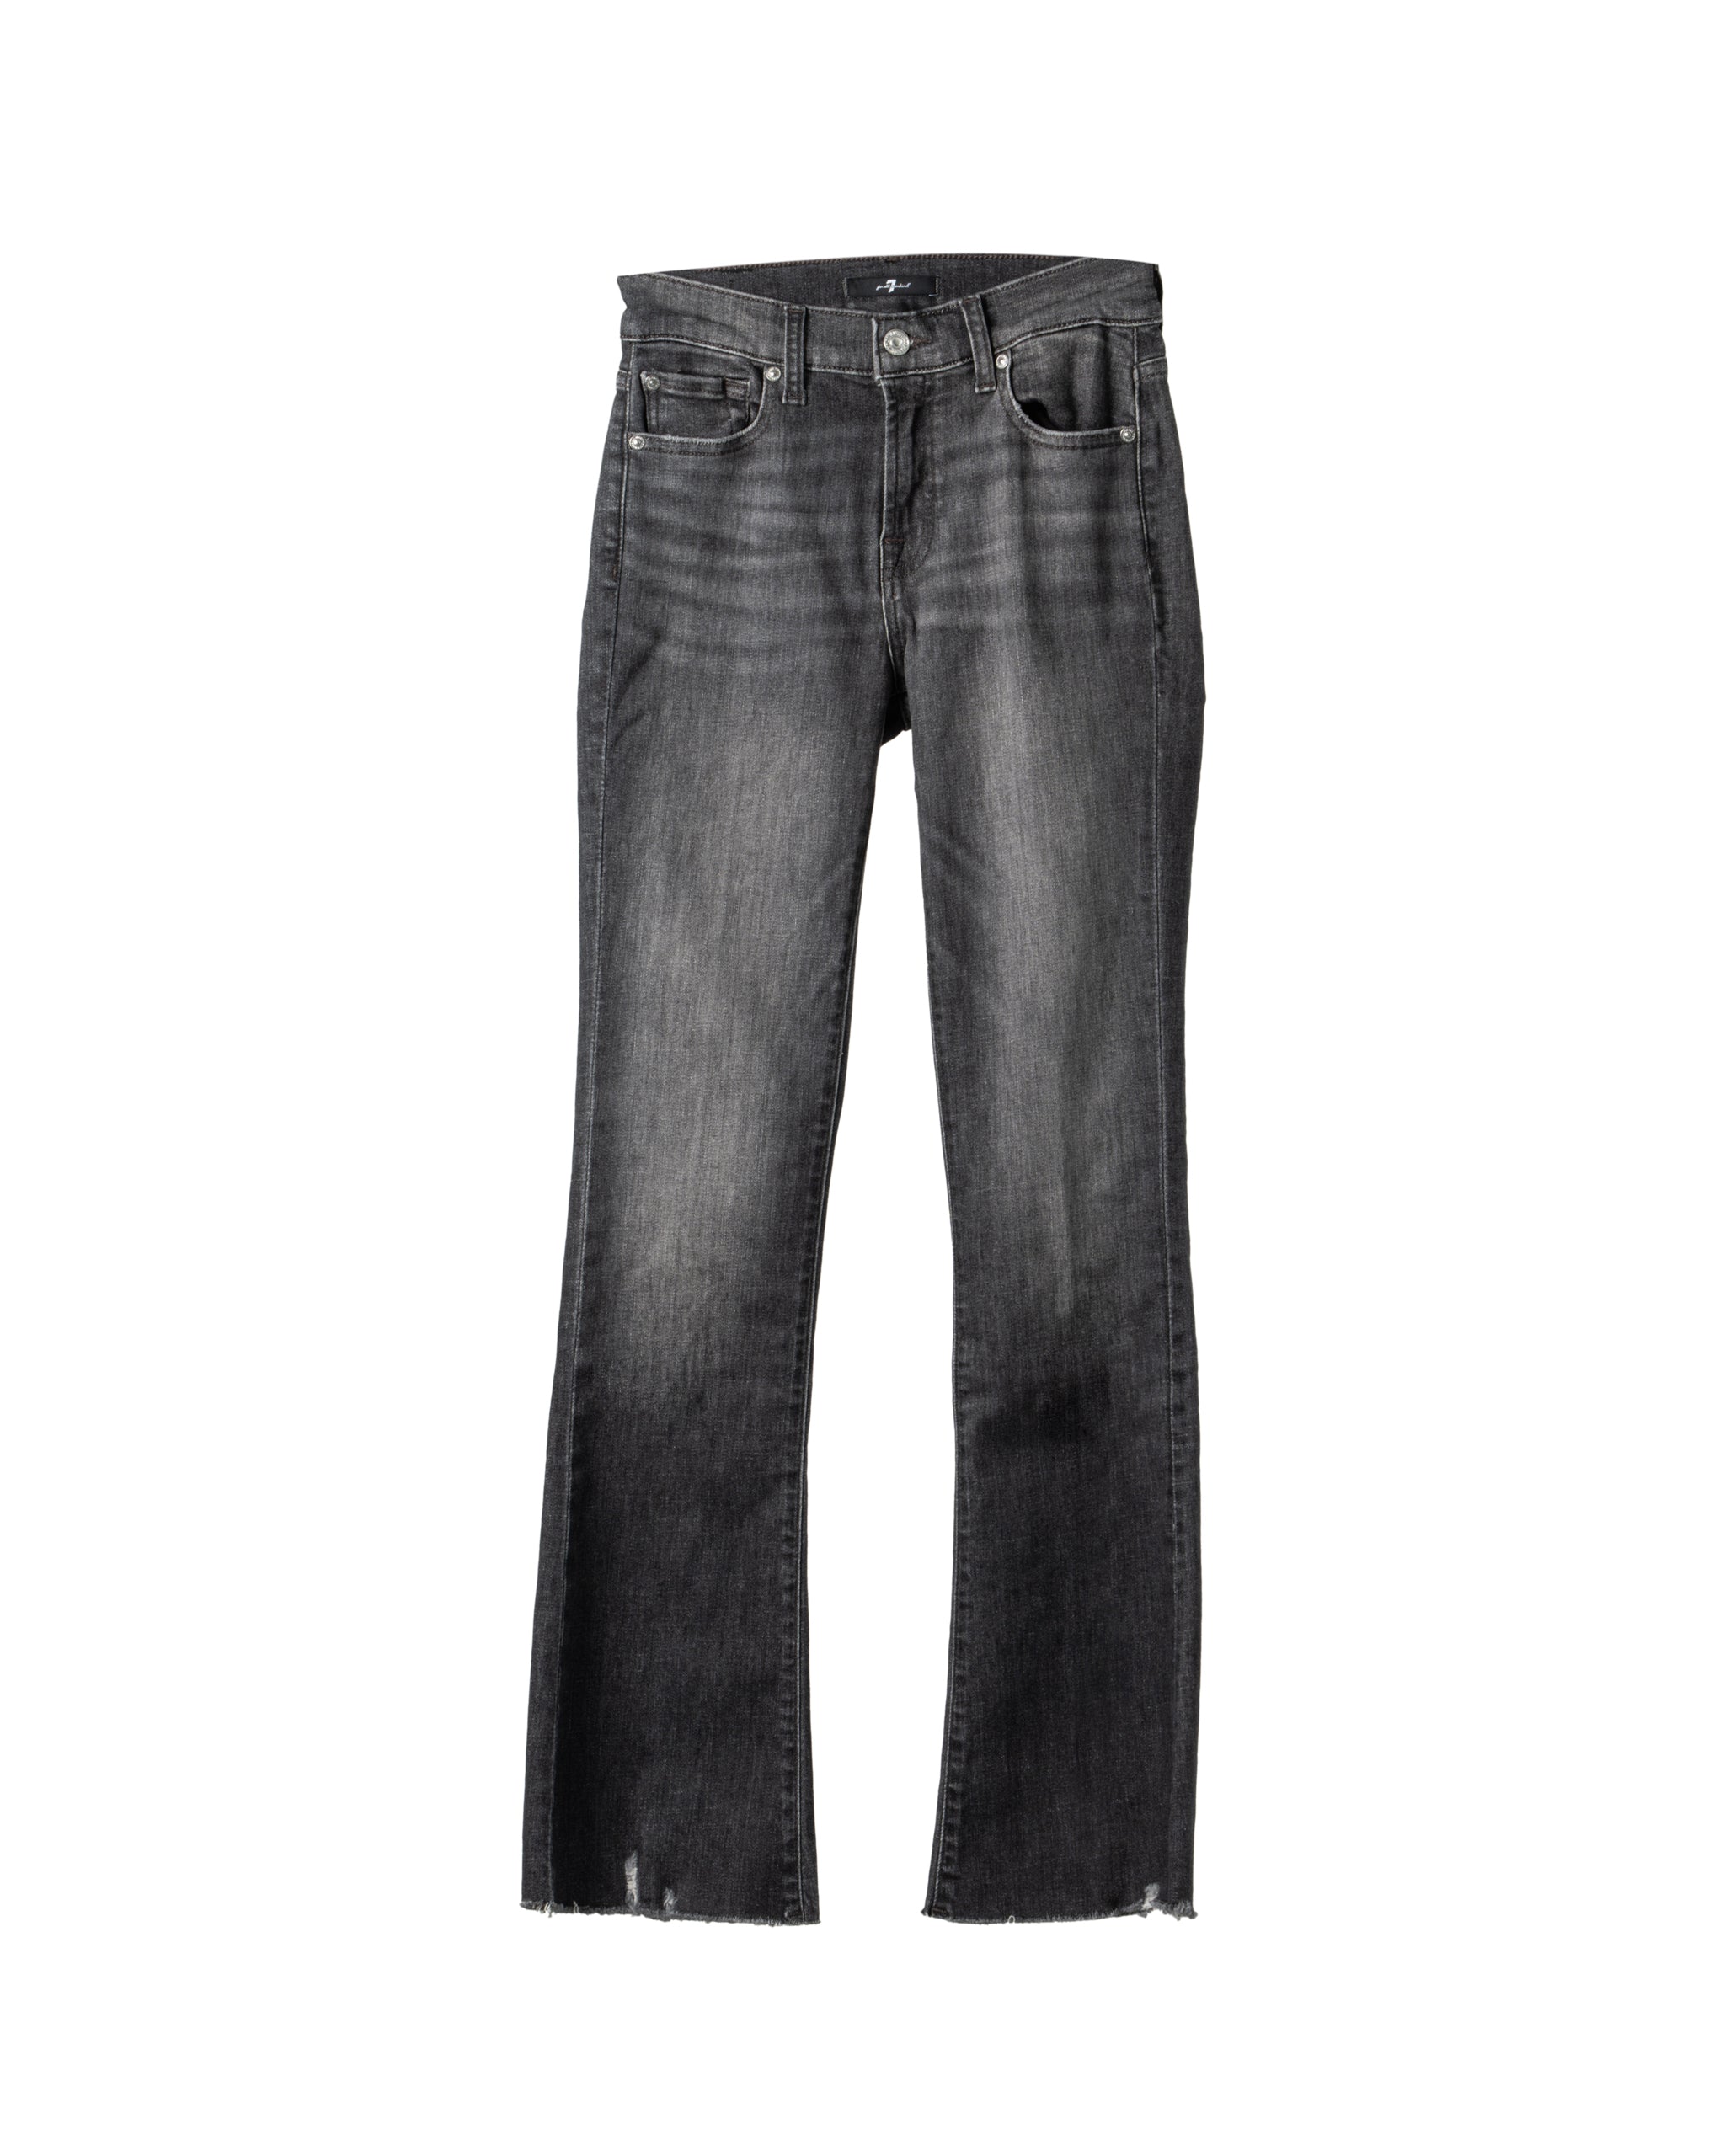 BOOTCUT TAILORLESS 32INCH